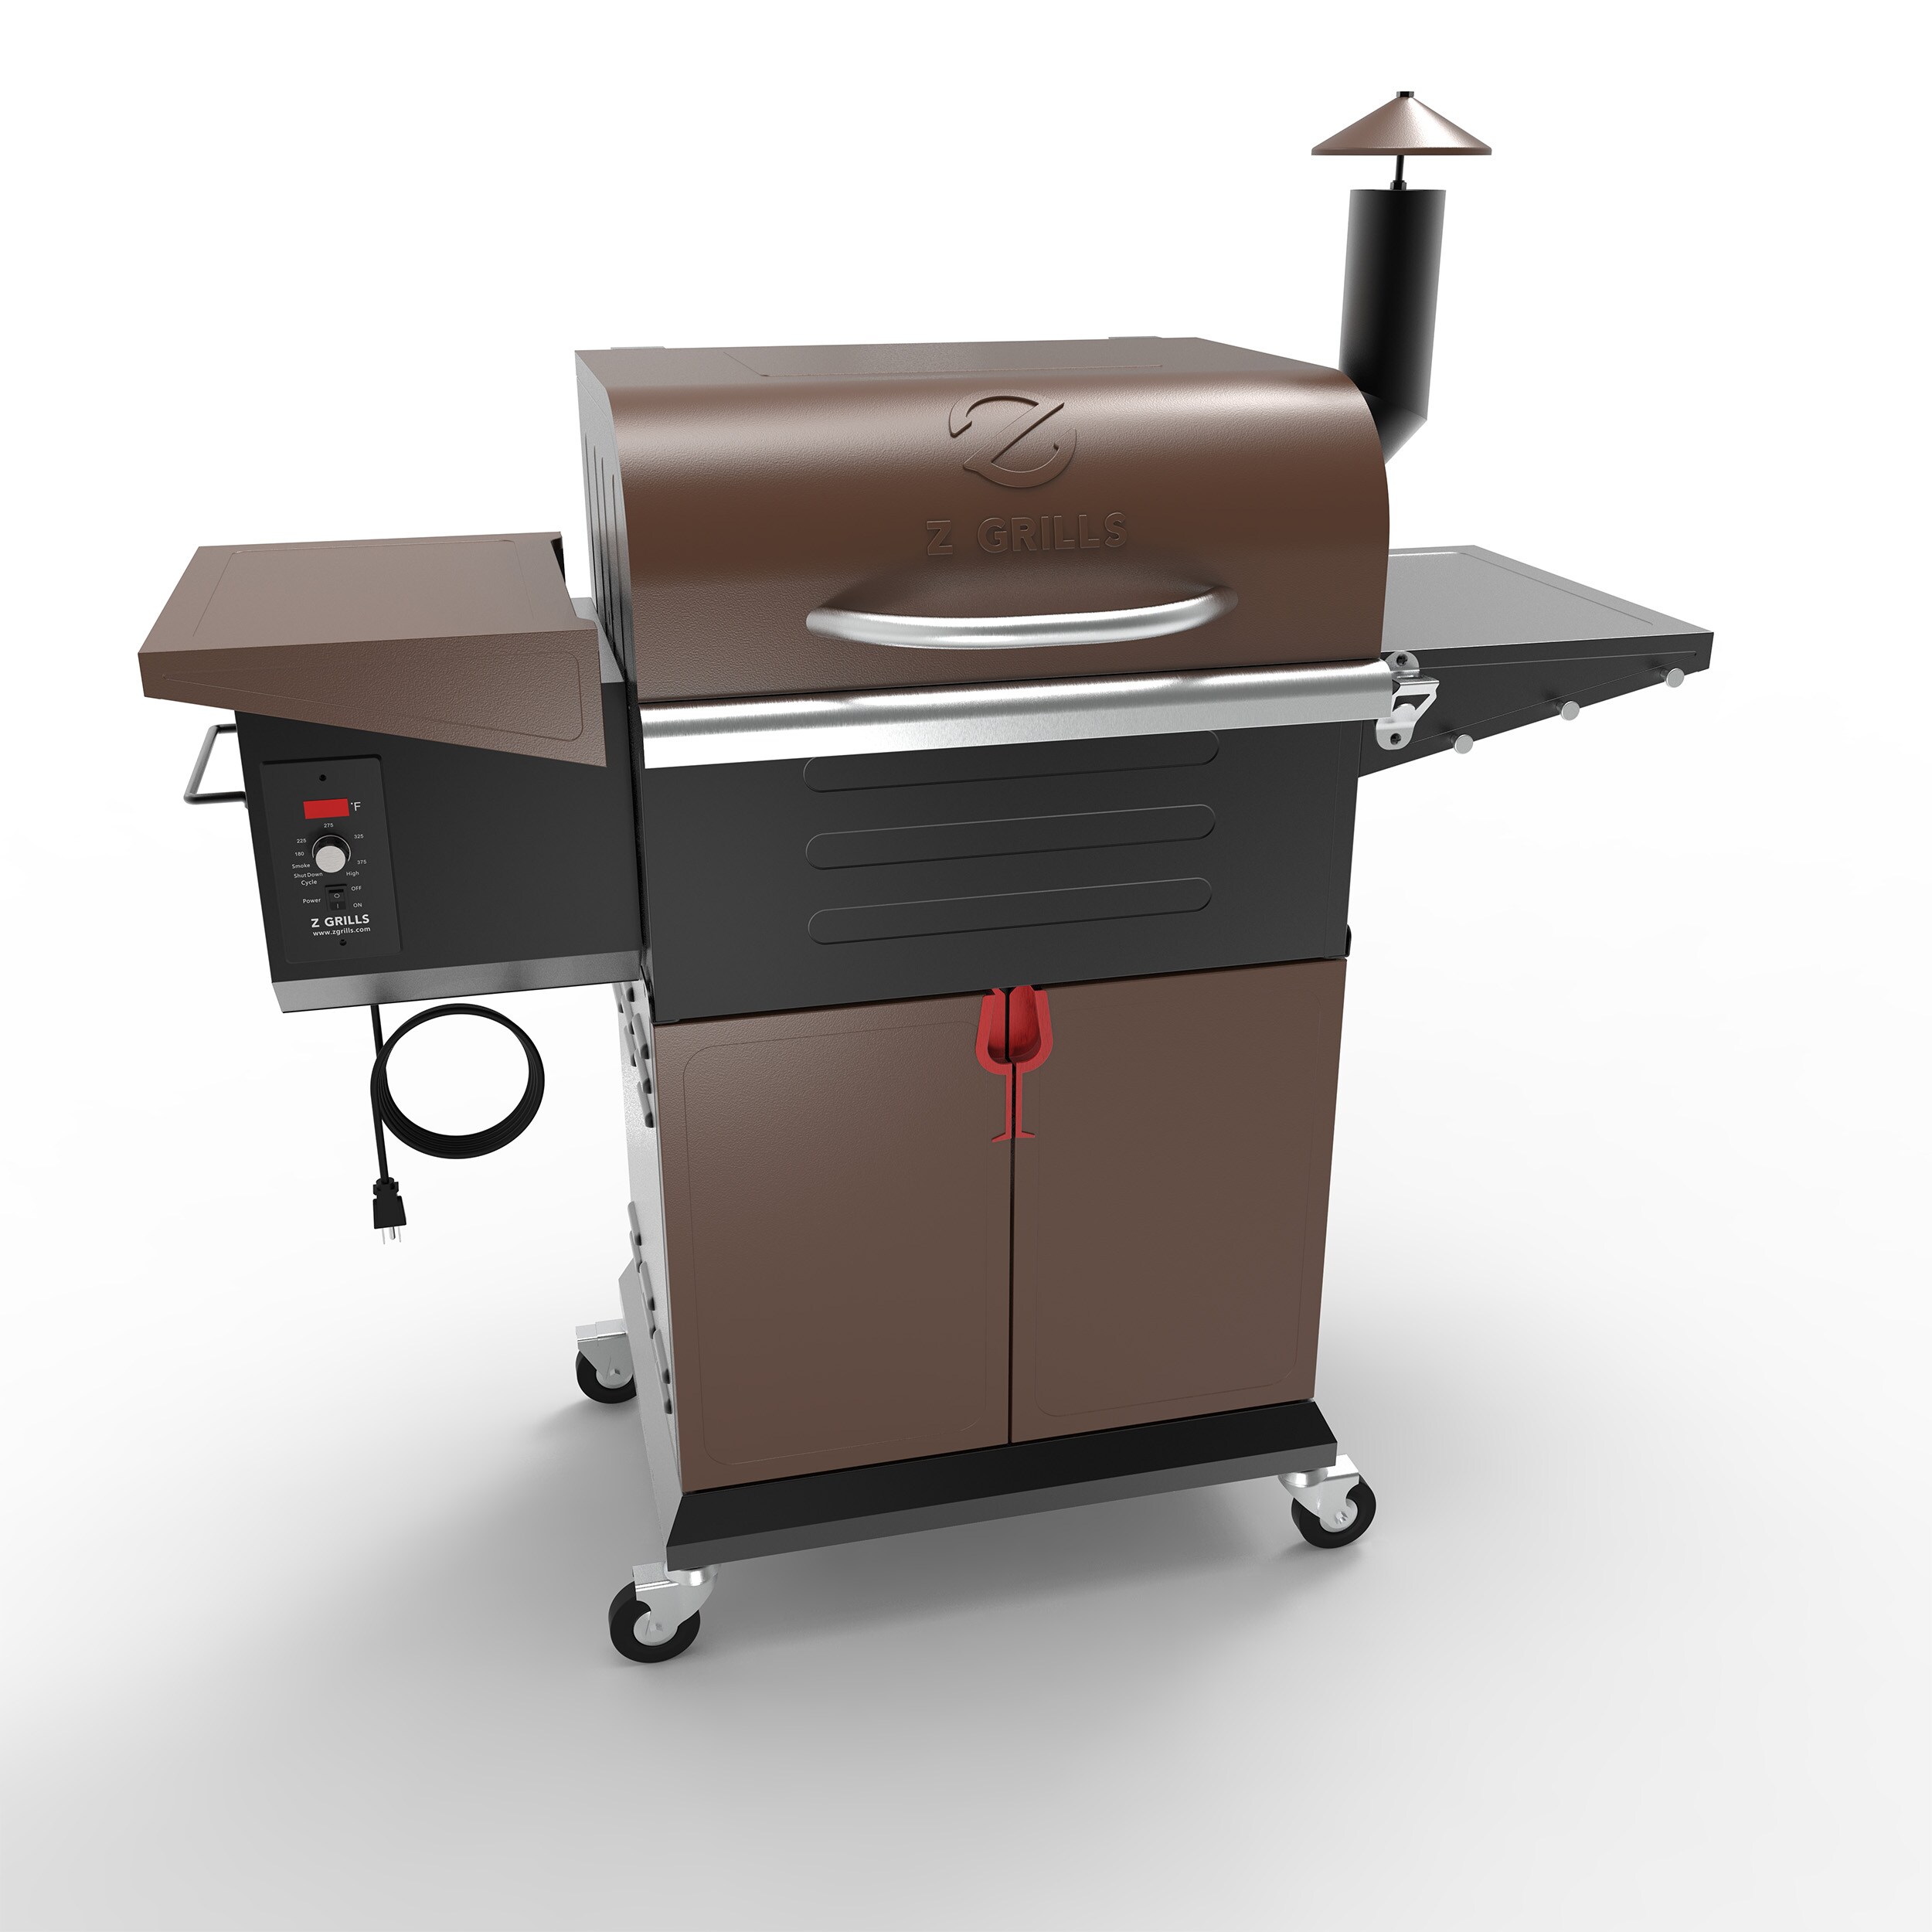 573 Sq In Z GRILLS ZPG-L600D 8 in 1 Wood Pellet Portable Steel Constructed Grill Smoker for Outdoor BBQ Cooking with Digital Temperature Control Bronze Bottom Storage Area 